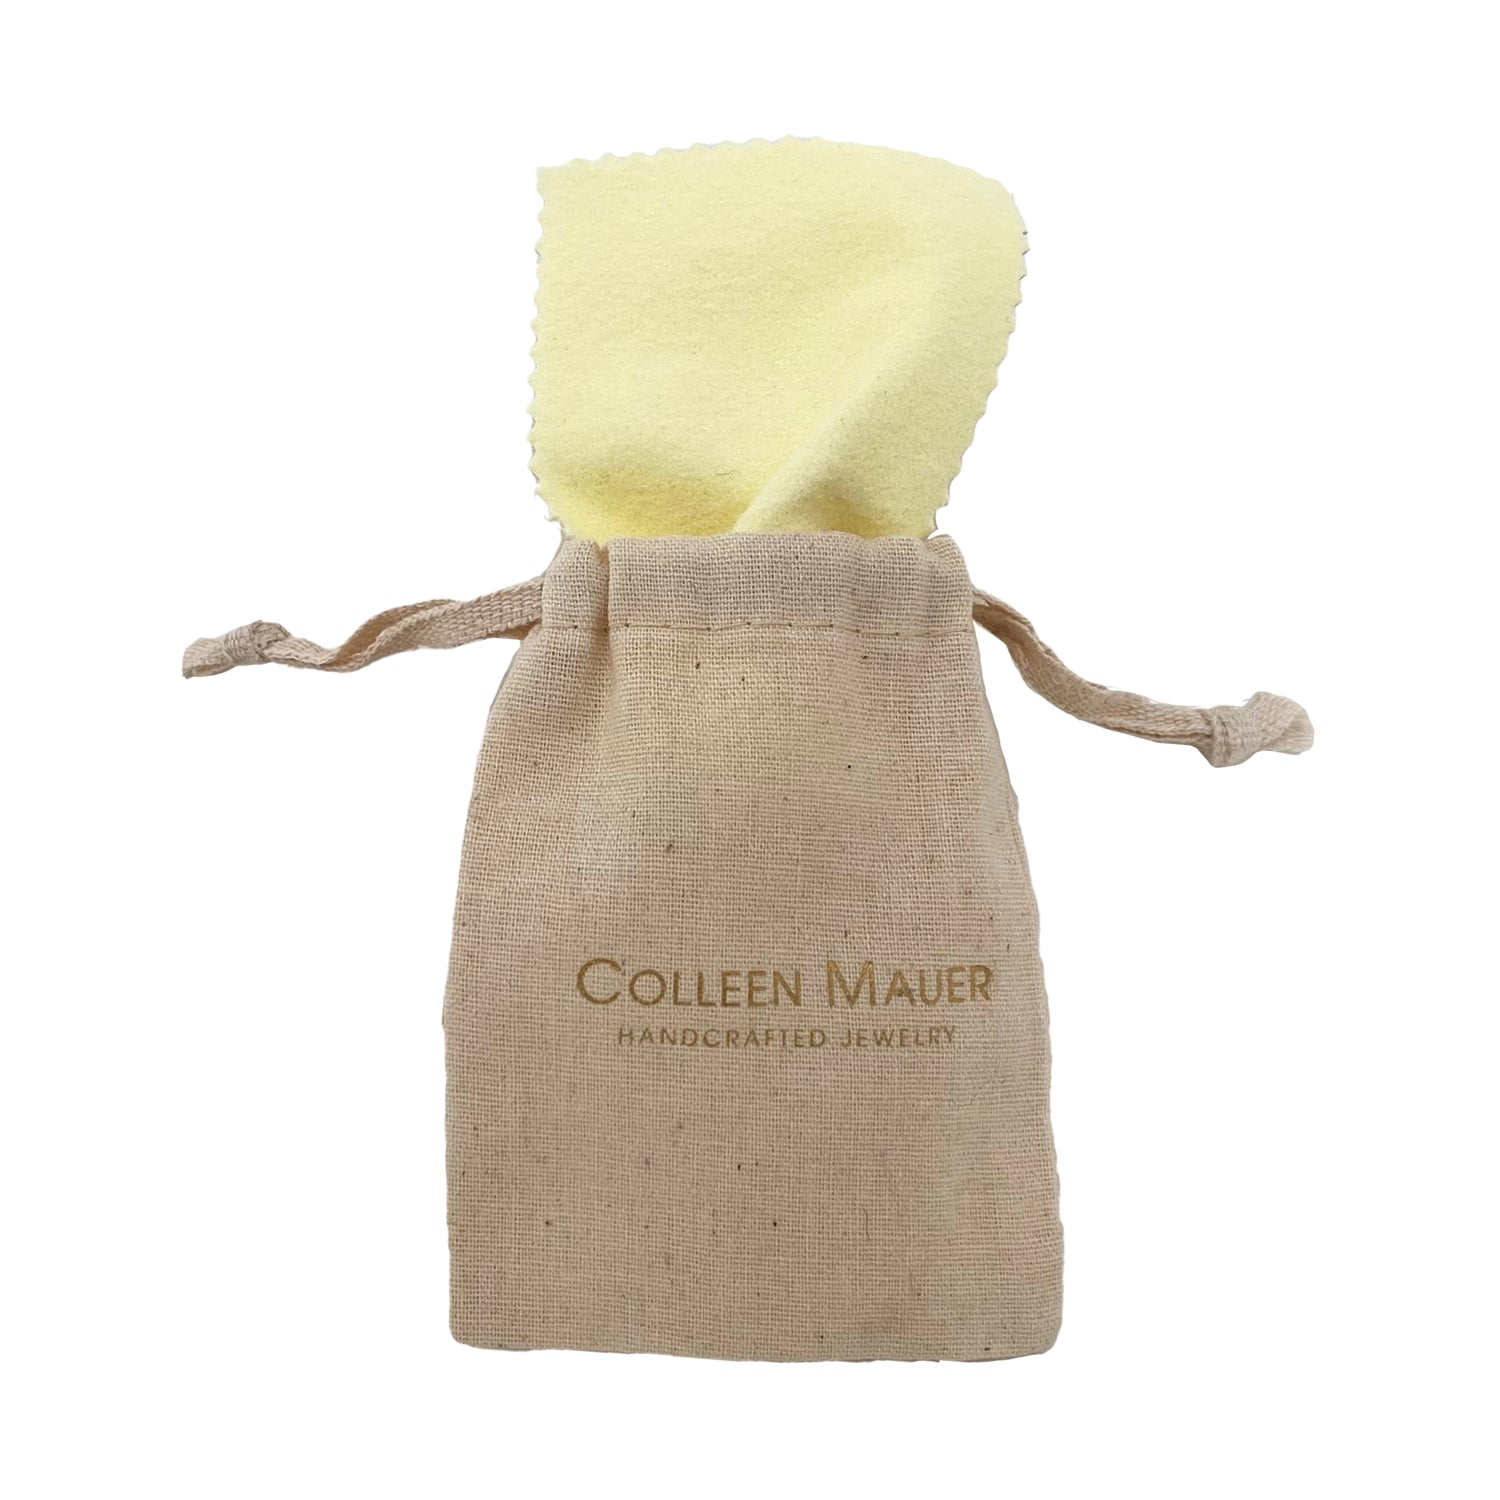 Signature Pouch & Shiny Finishing Cloth - Colleen Mauer Designs